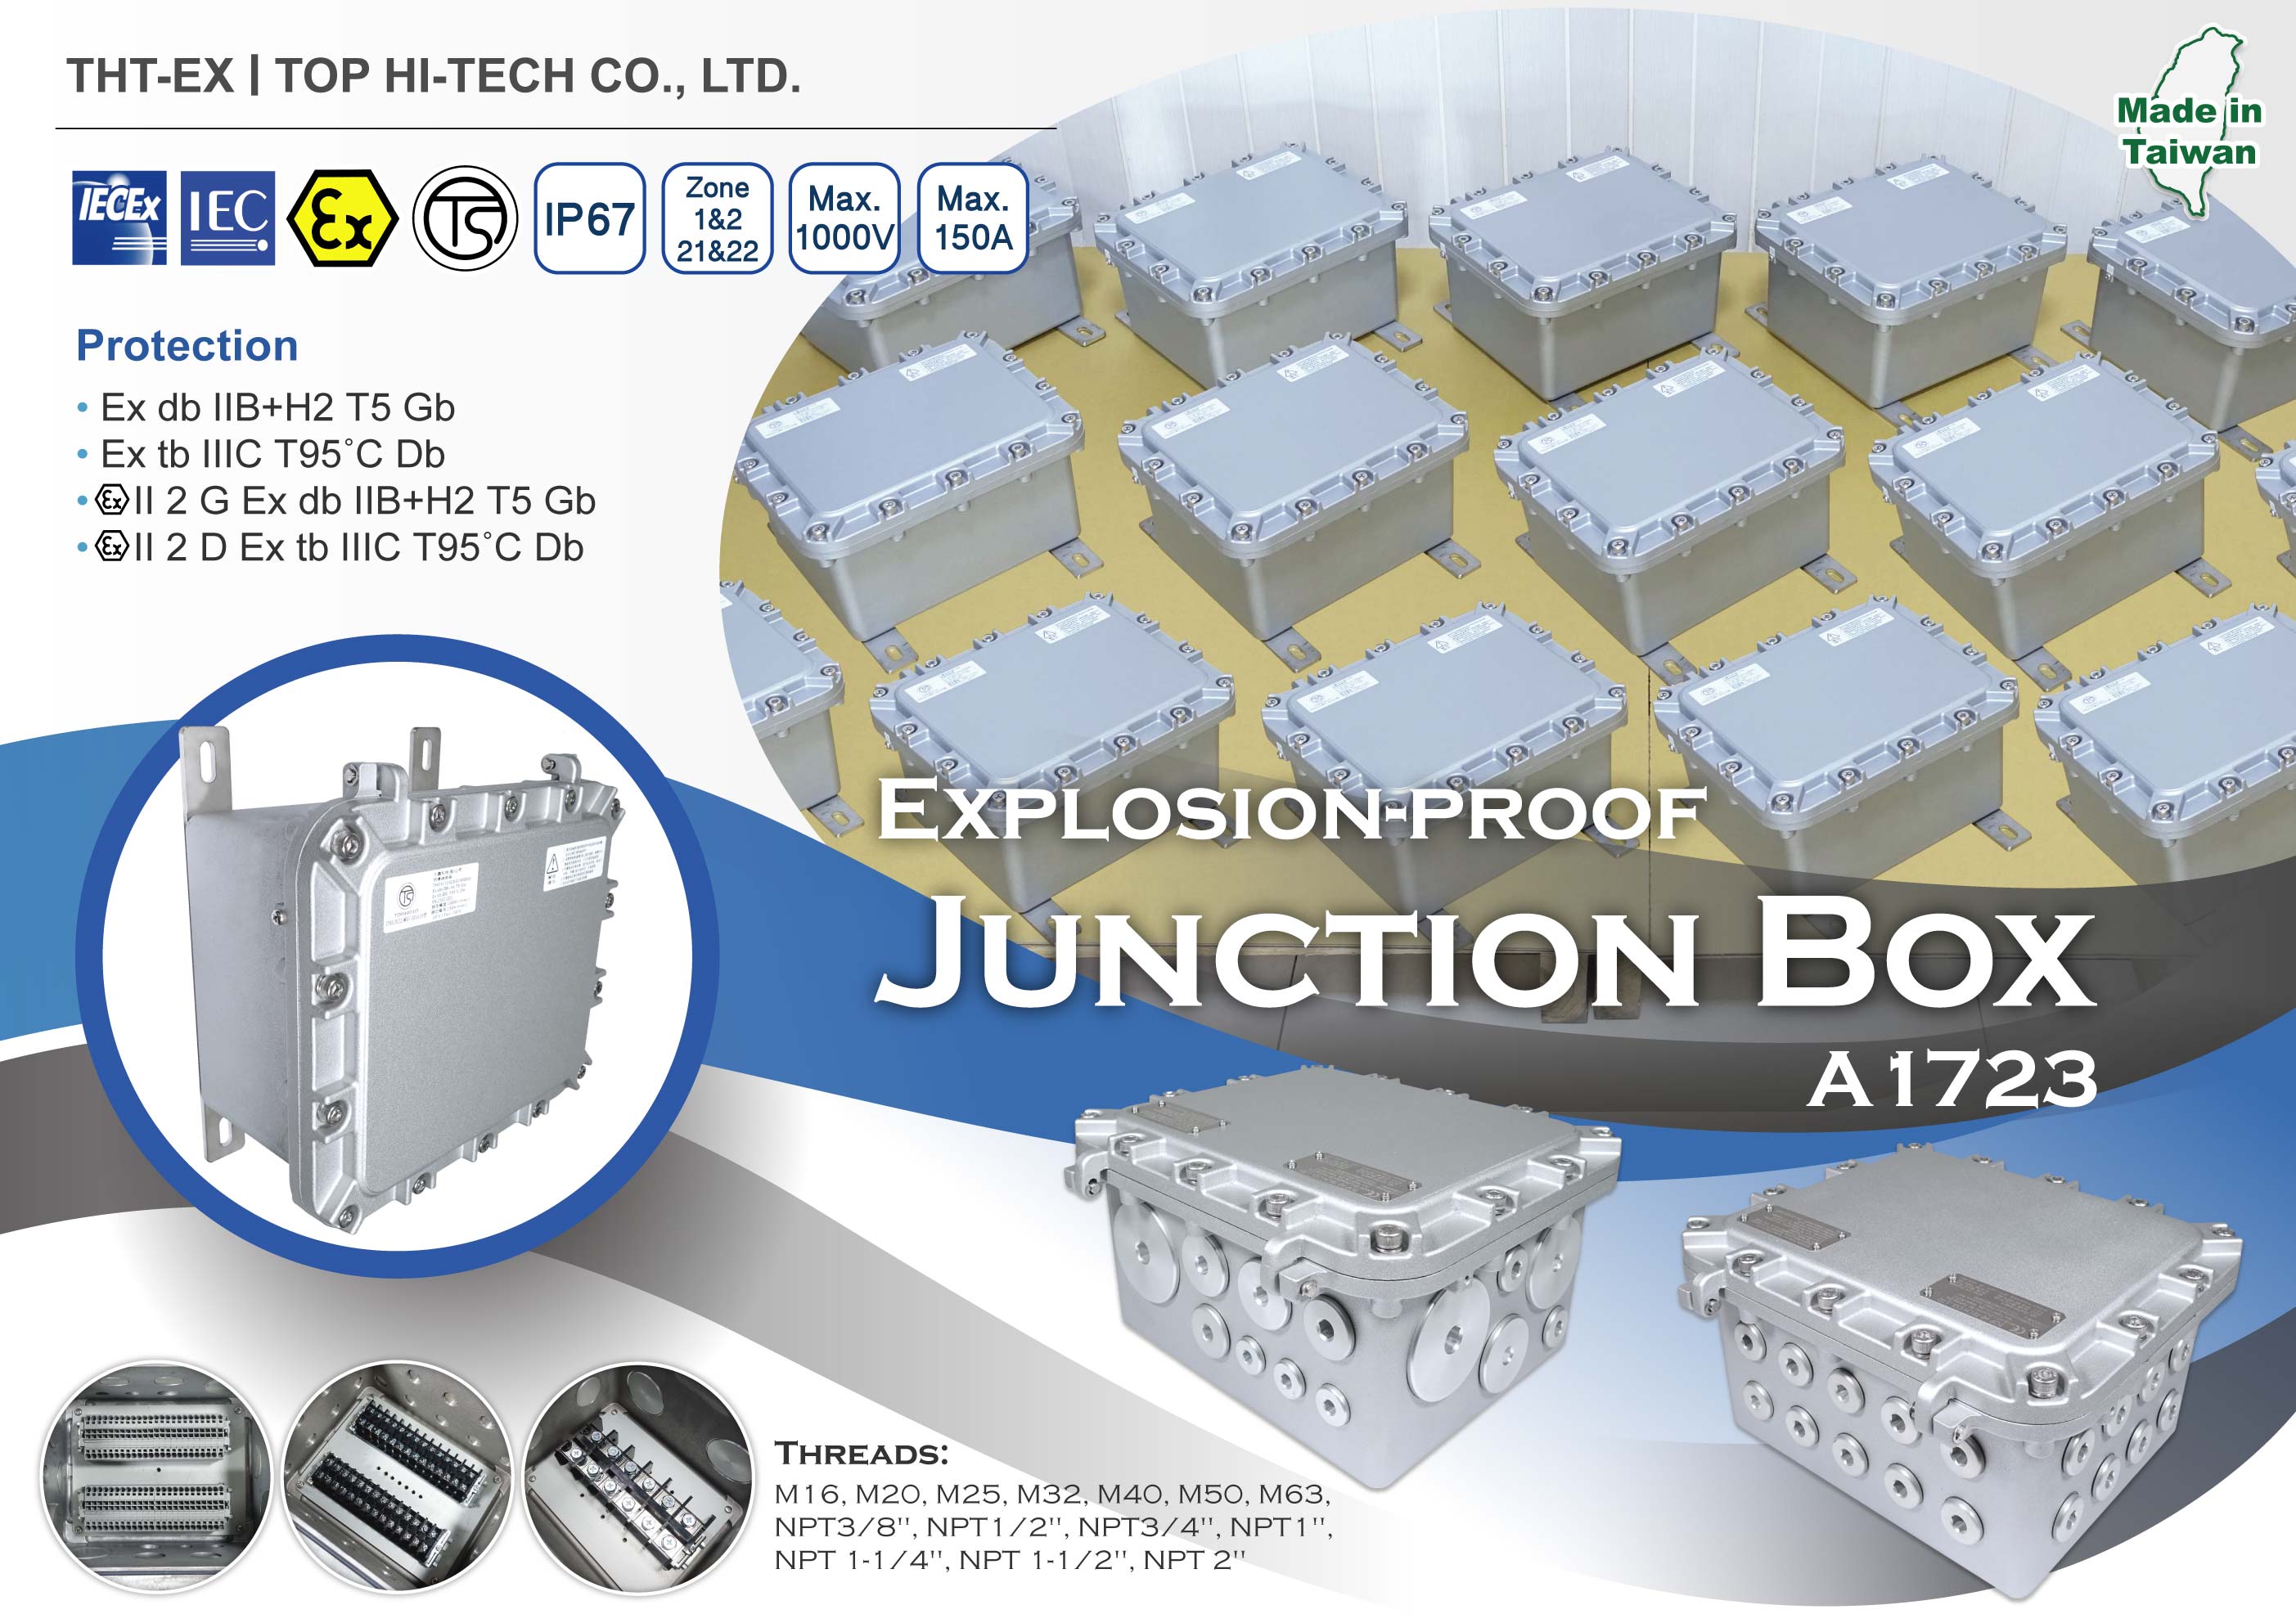 Customizable Explosion Proof Junction Box to Meet Any of Your Needs!